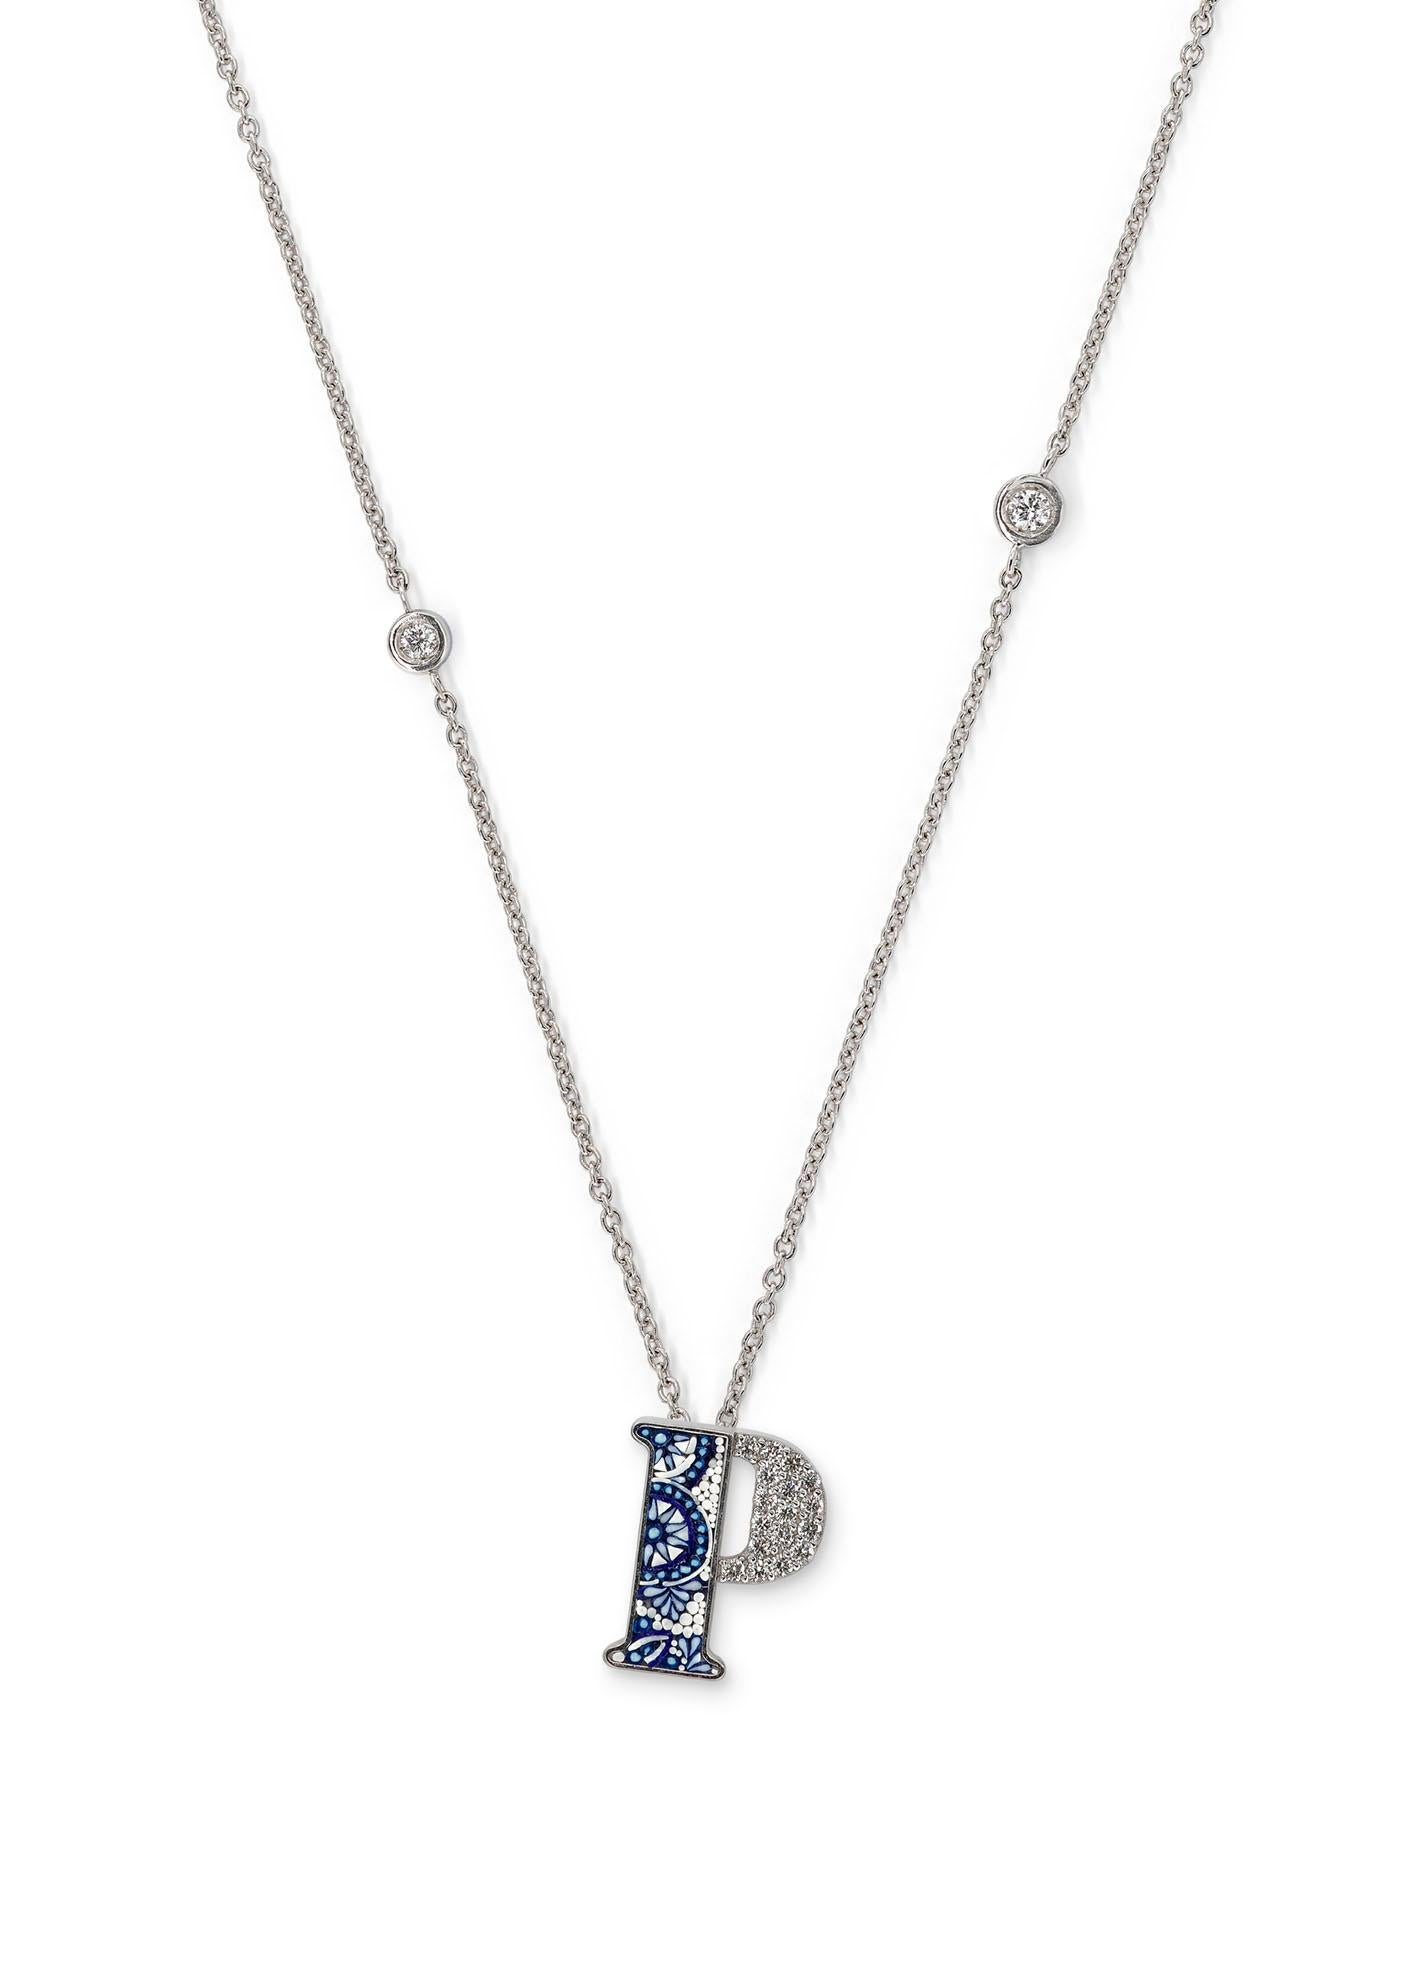 Brilliant Cut Necklace Letter P White Gold White Diamonds Hand Decorated with Micromosaic For Sale